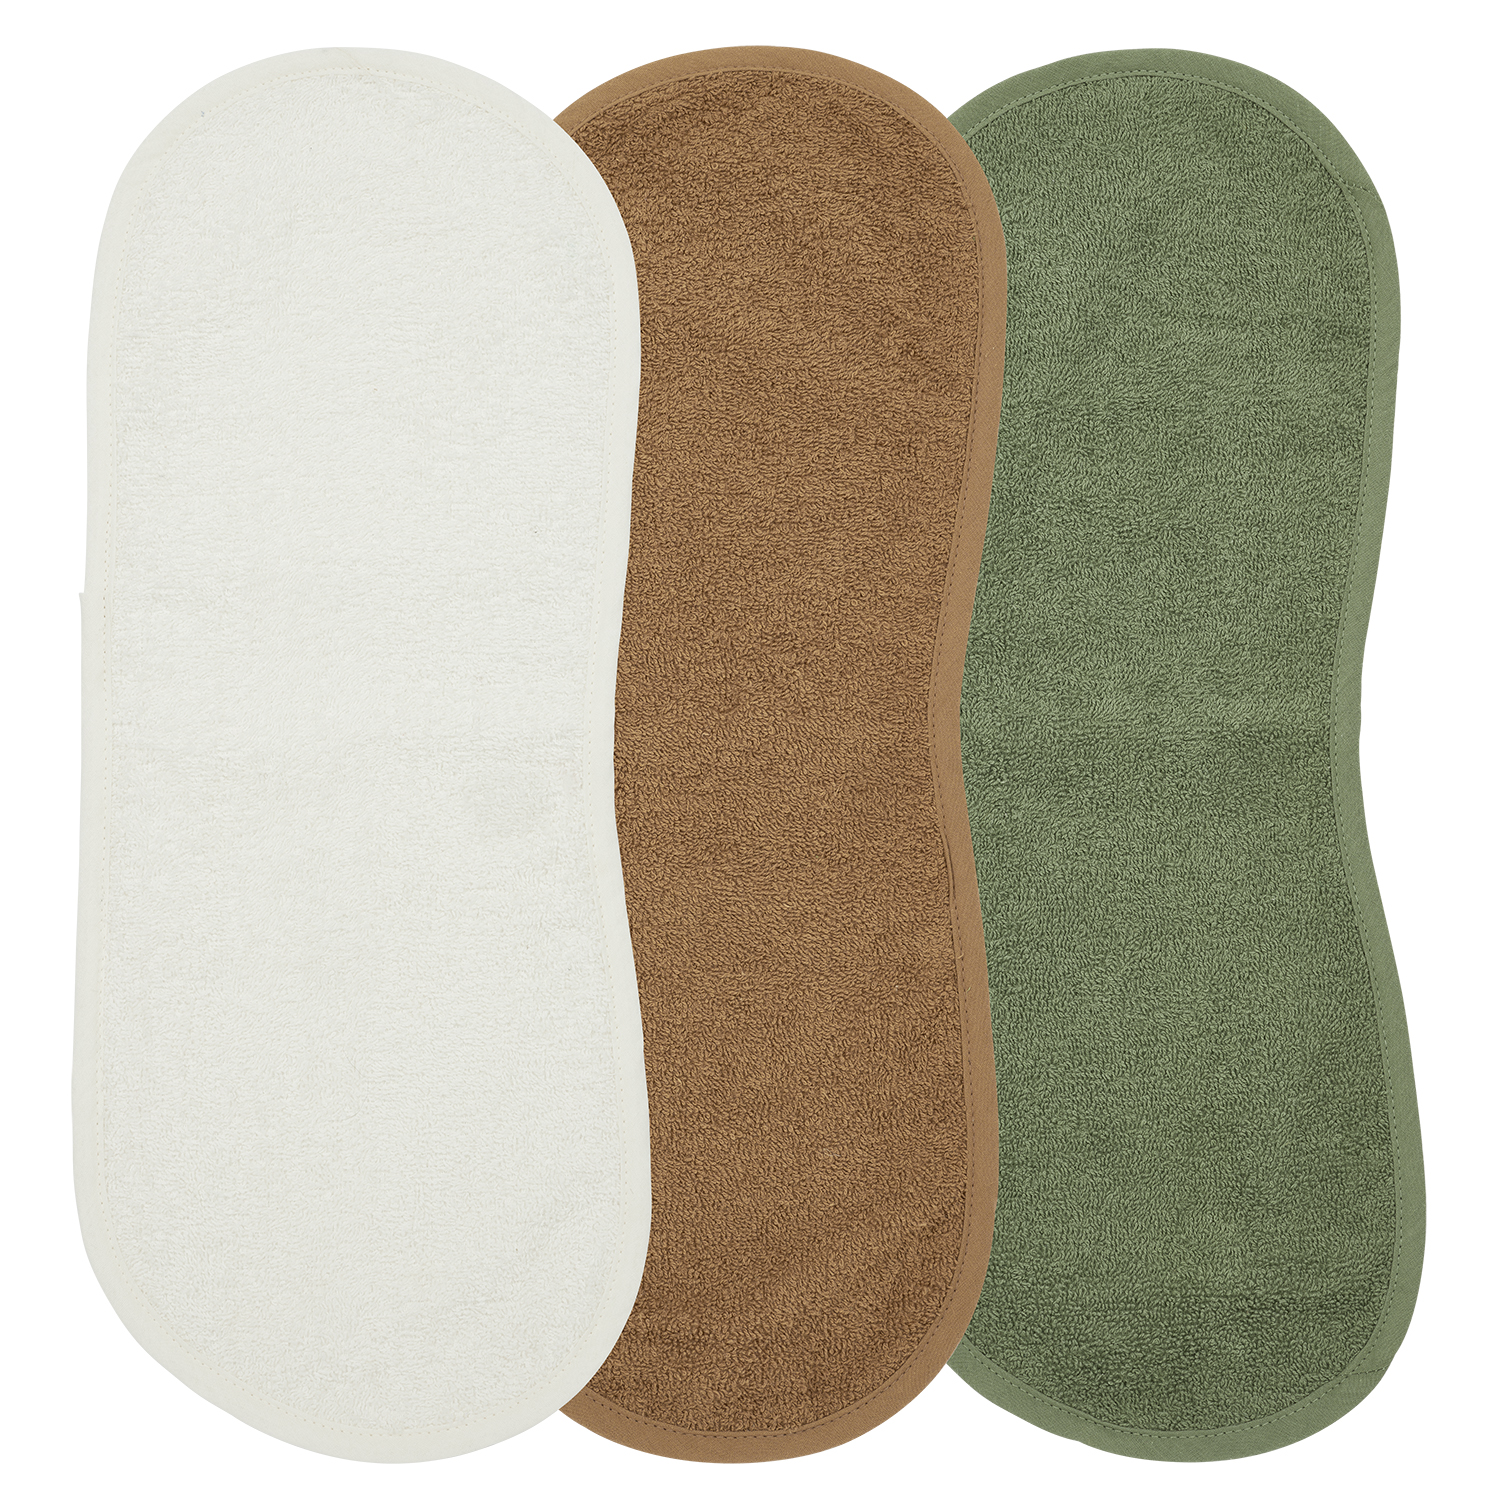 Burb cloth 3-pack terry Uni - offwhite/toffee/forest green - 53x20cm